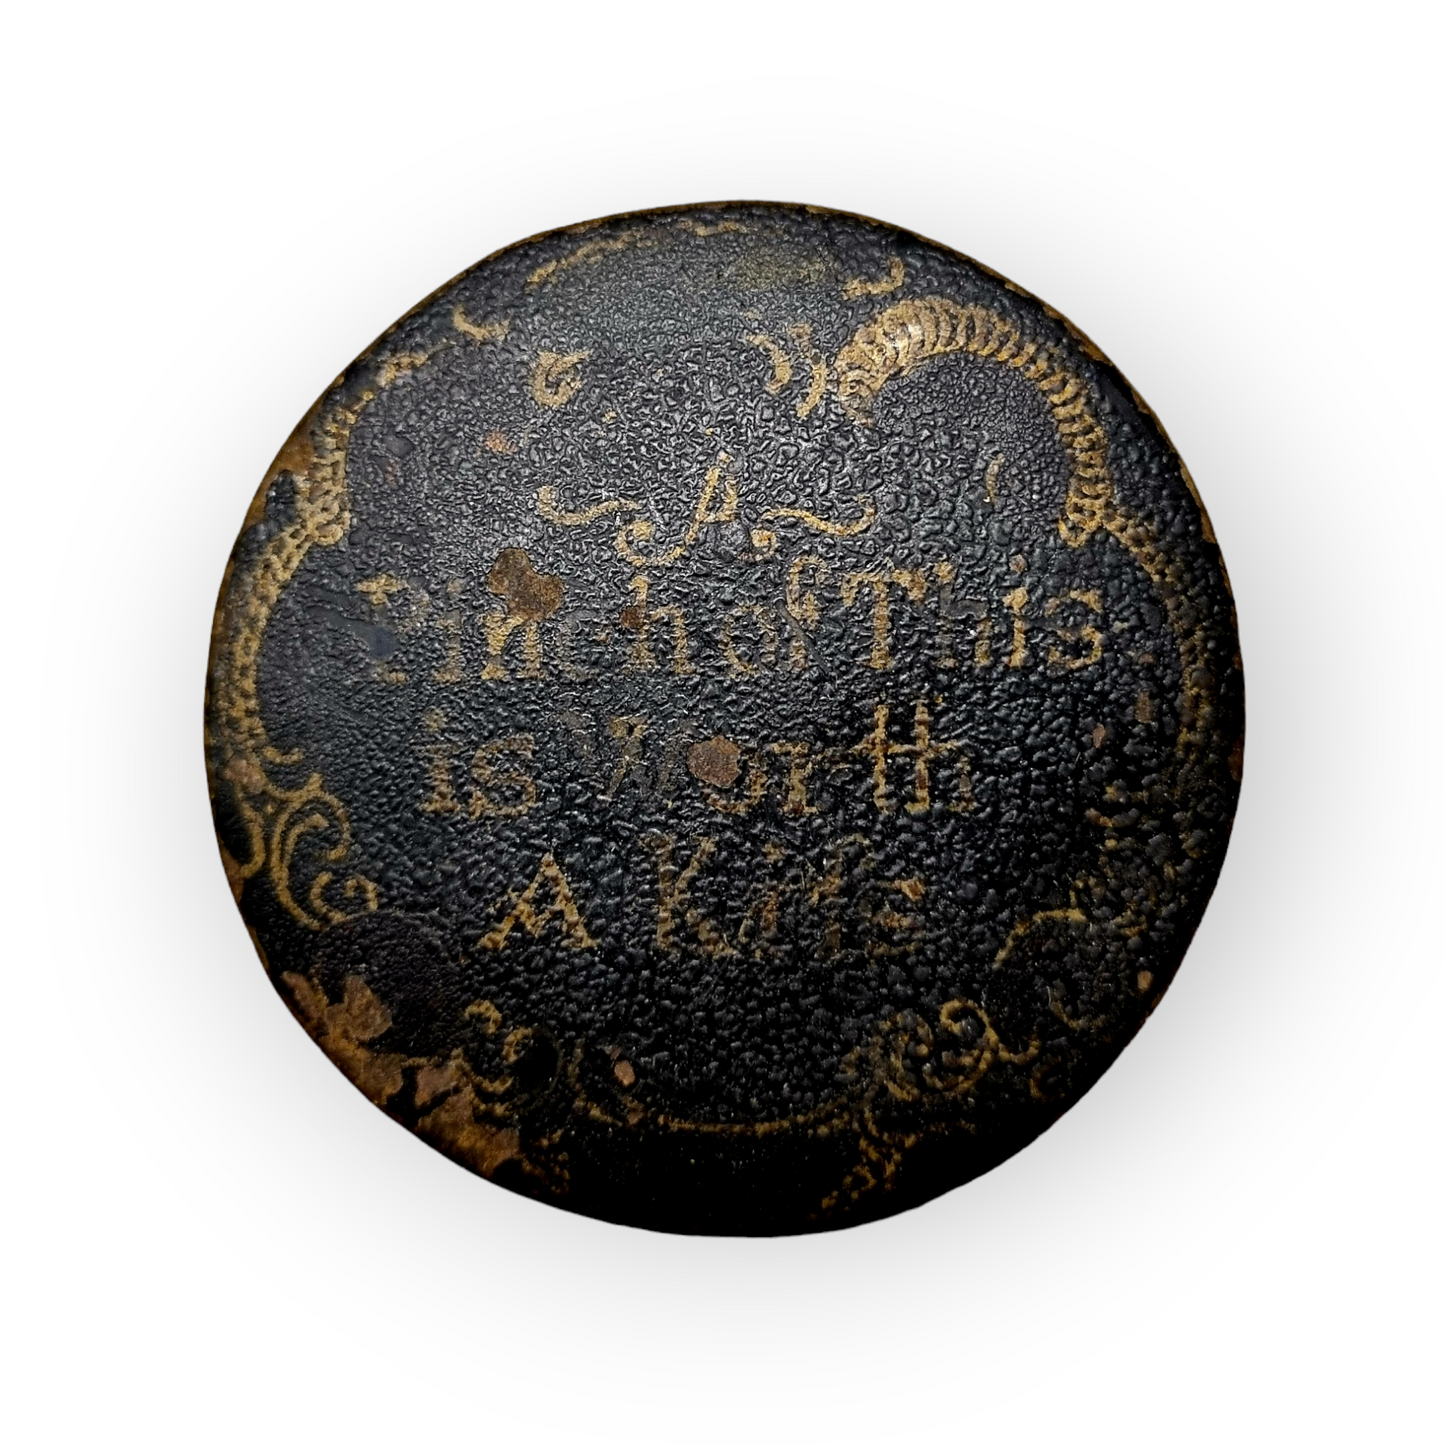 Late 18th Century English Antique Toleware Tobacco Snuff Box, Bearing The Inscription "A pinch of this is worth a kiss"